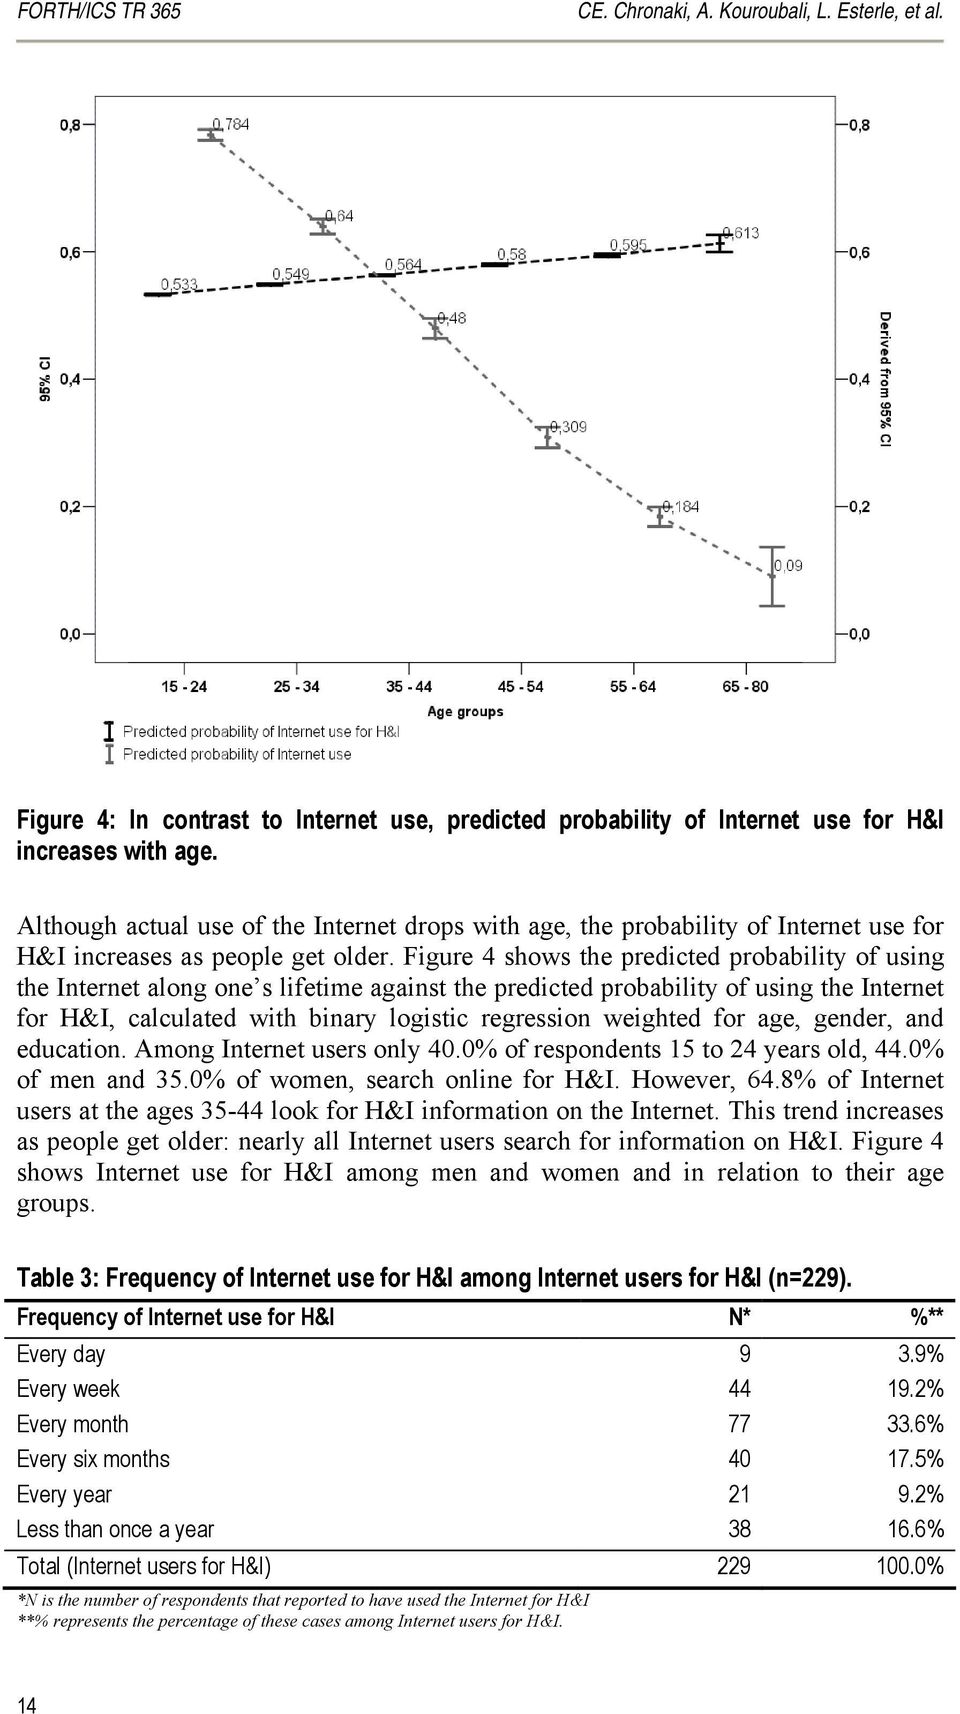 Figure 4 shows the predicted probability of using the Internet along one s lifetime against the predicted probability of using the Internet for H&I, calculated with binary logistic regression